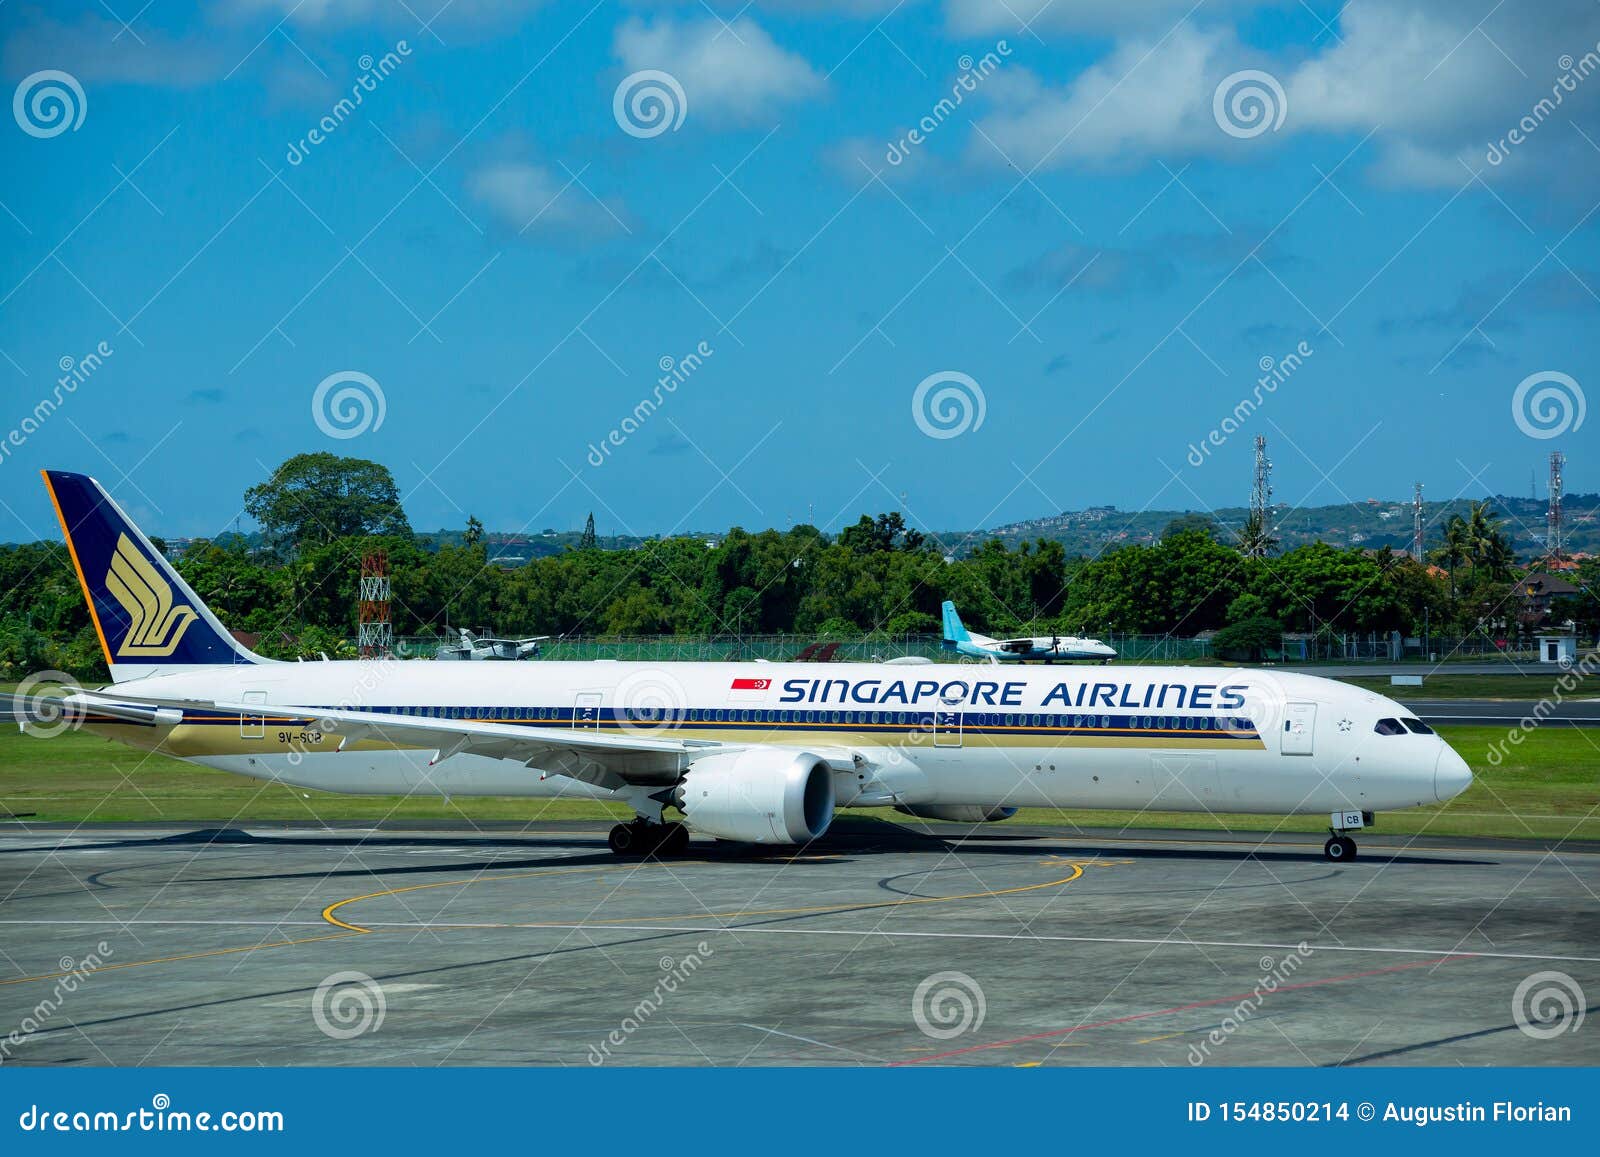 singapore airlines bali travel